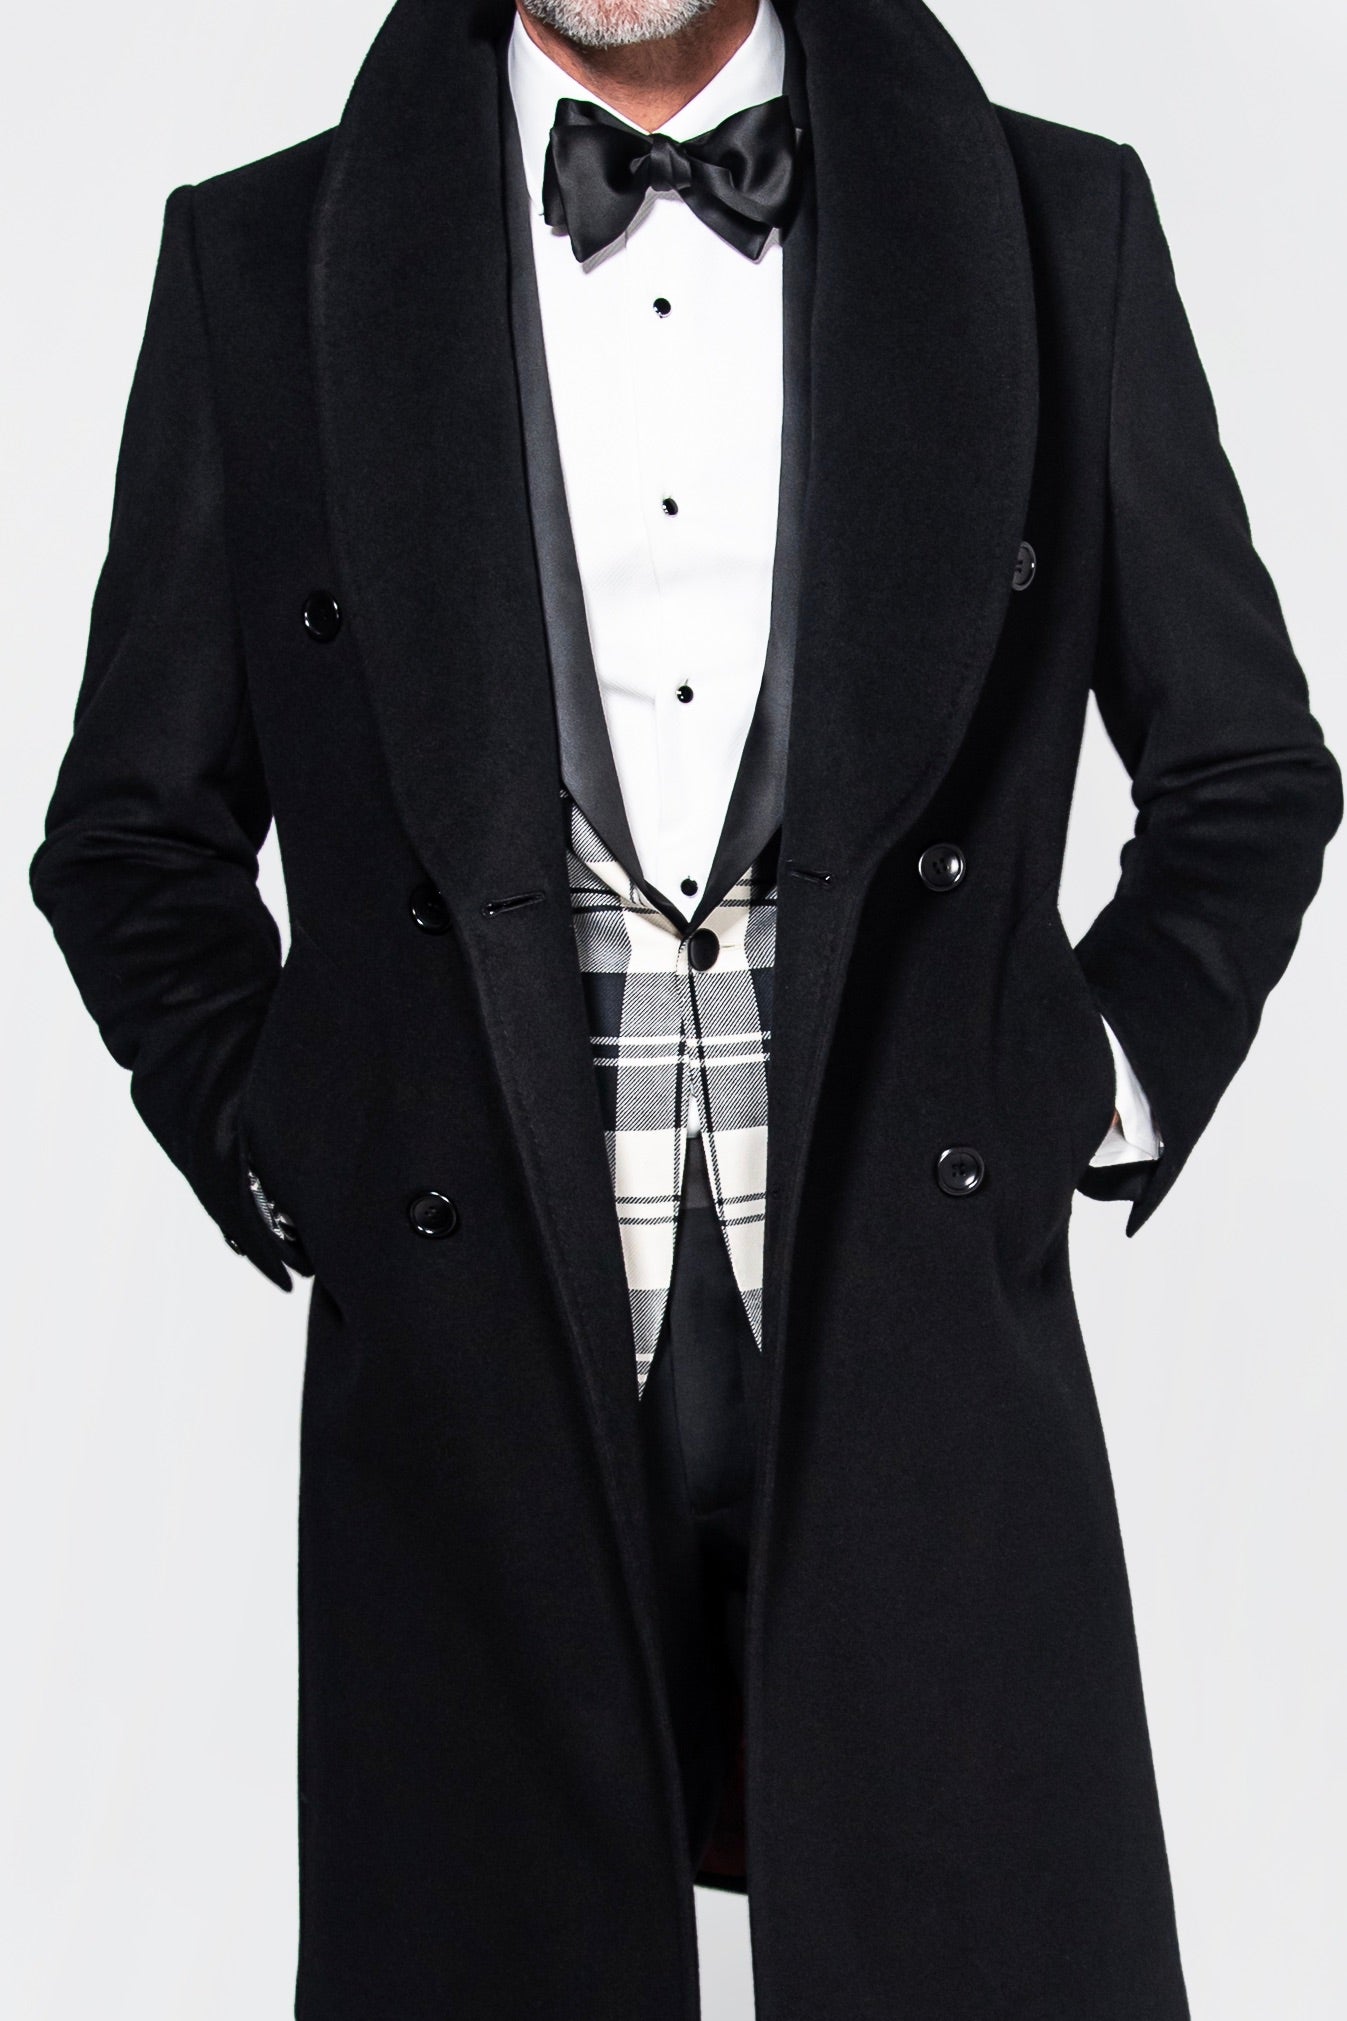 100% Cashmere Double Breasted Shawl Overcoat